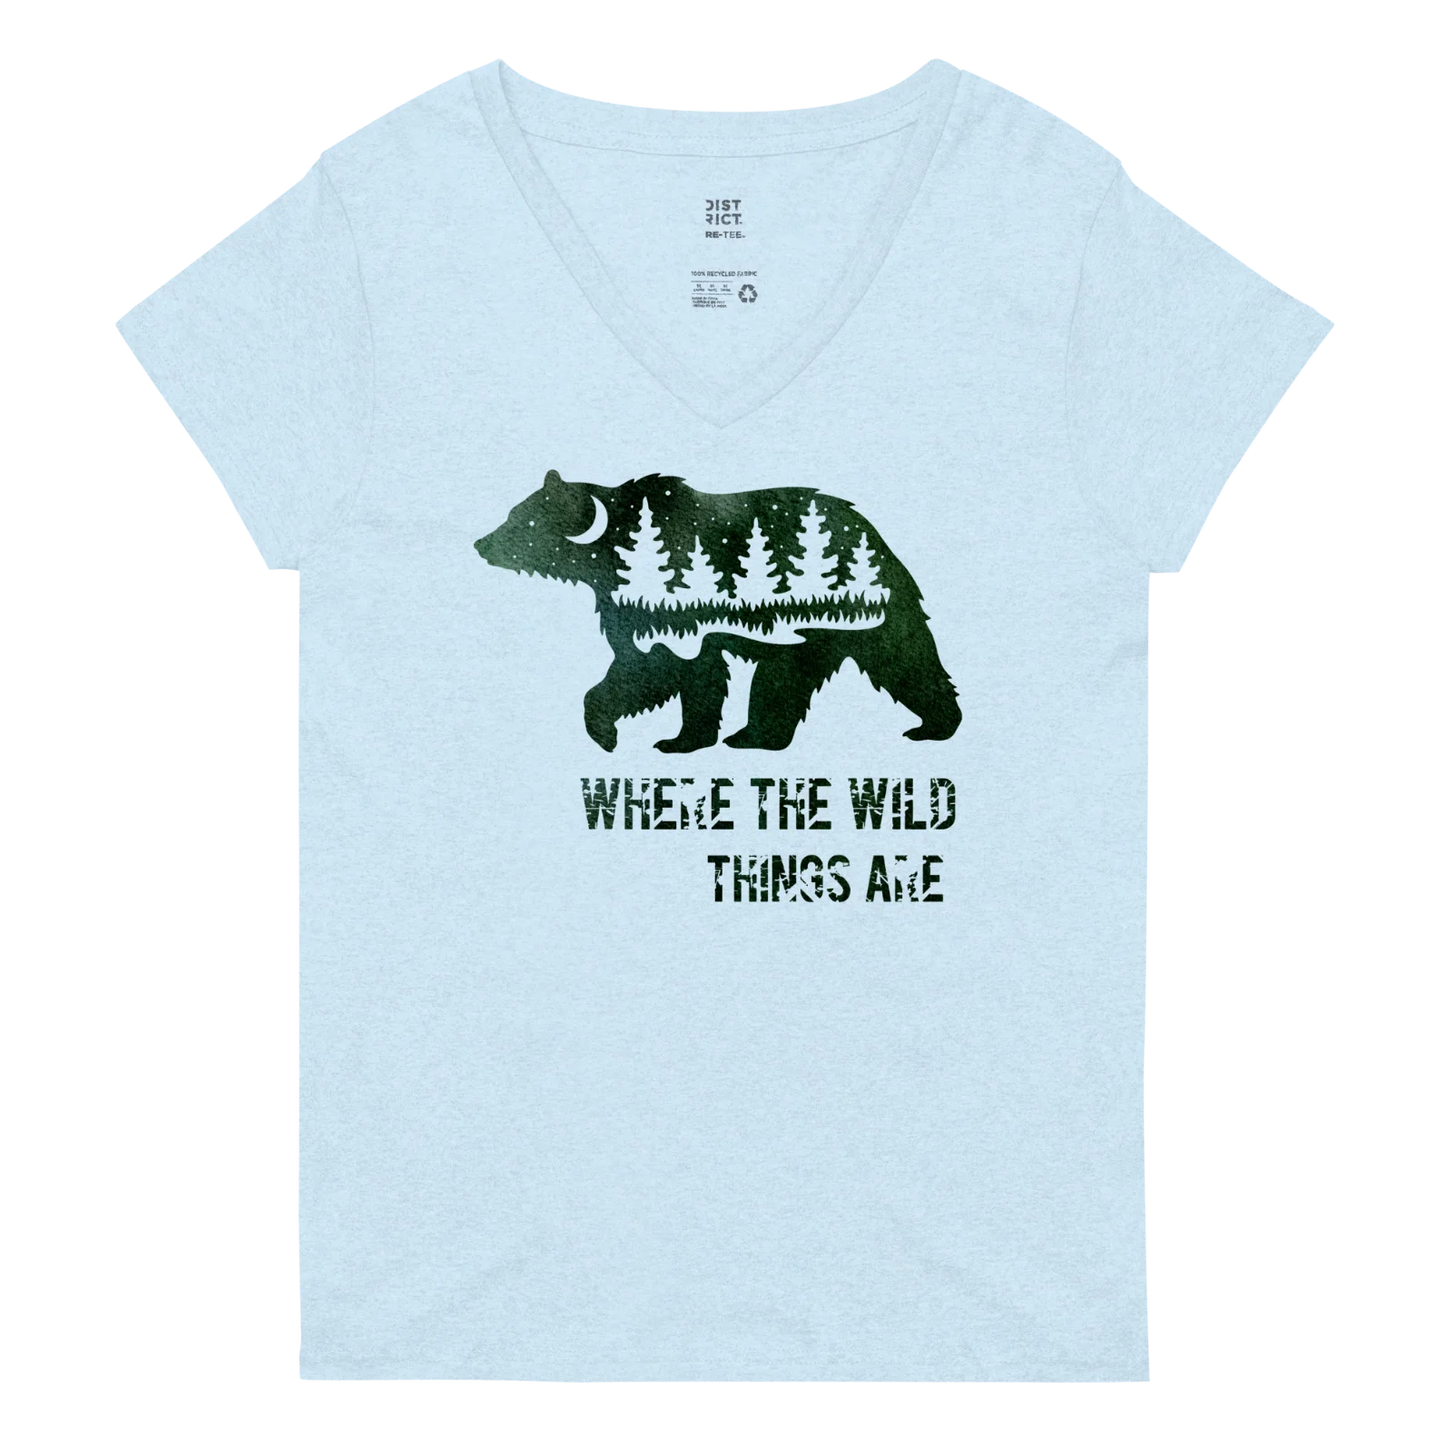 "Where the Wild Things Are" Recycled V-neck T-shirt